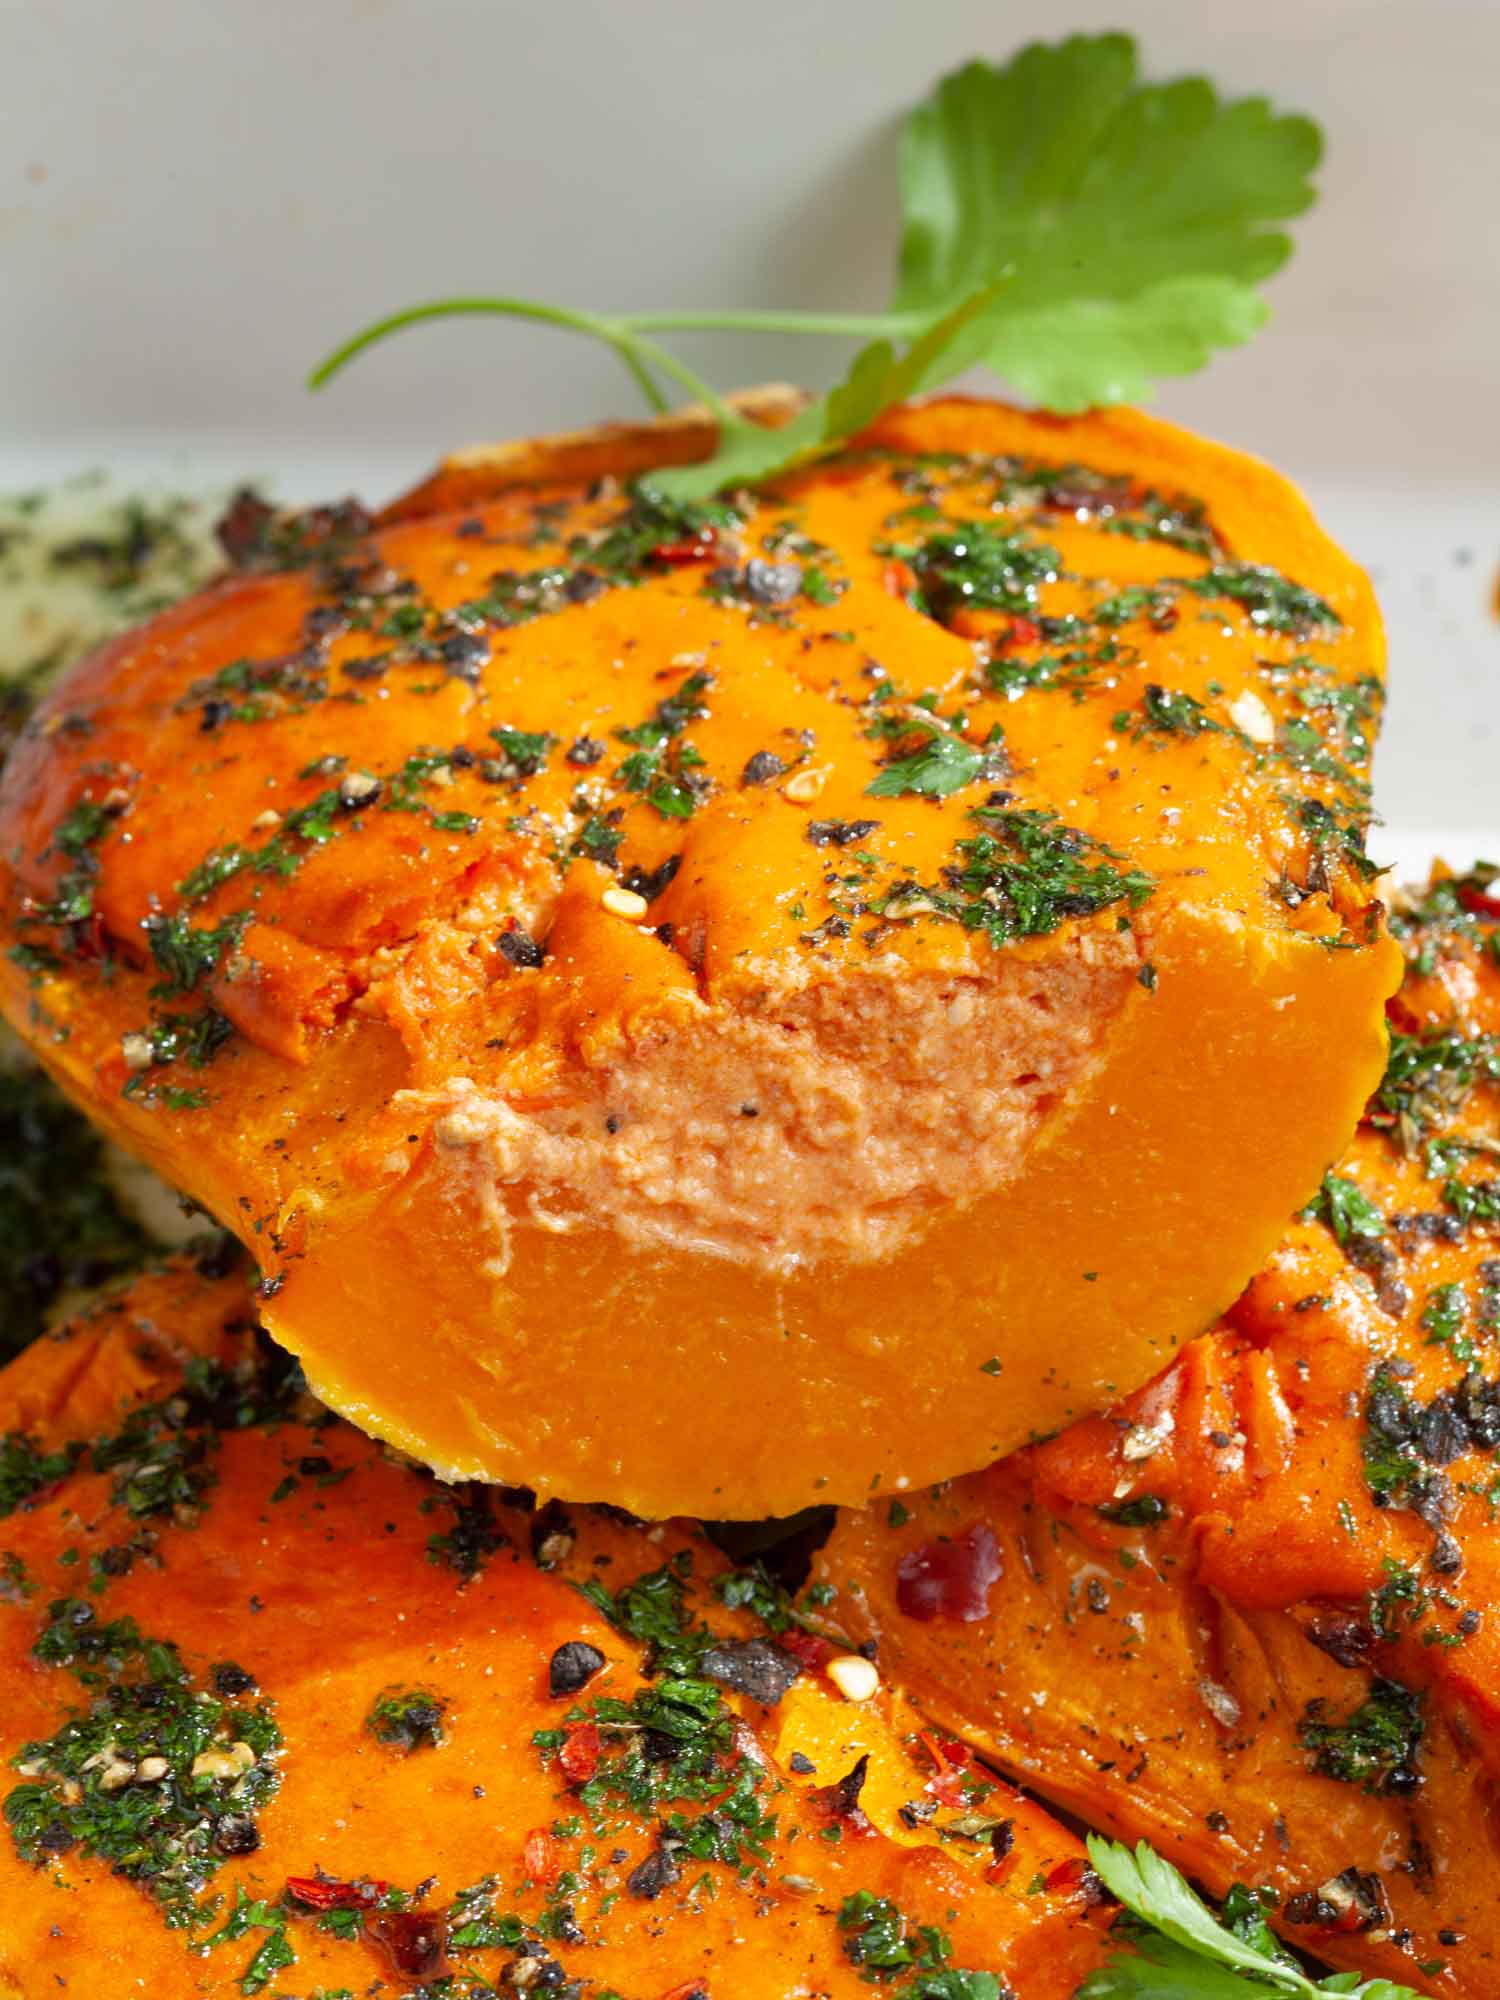 Butternut squash with feta and tomato mousse